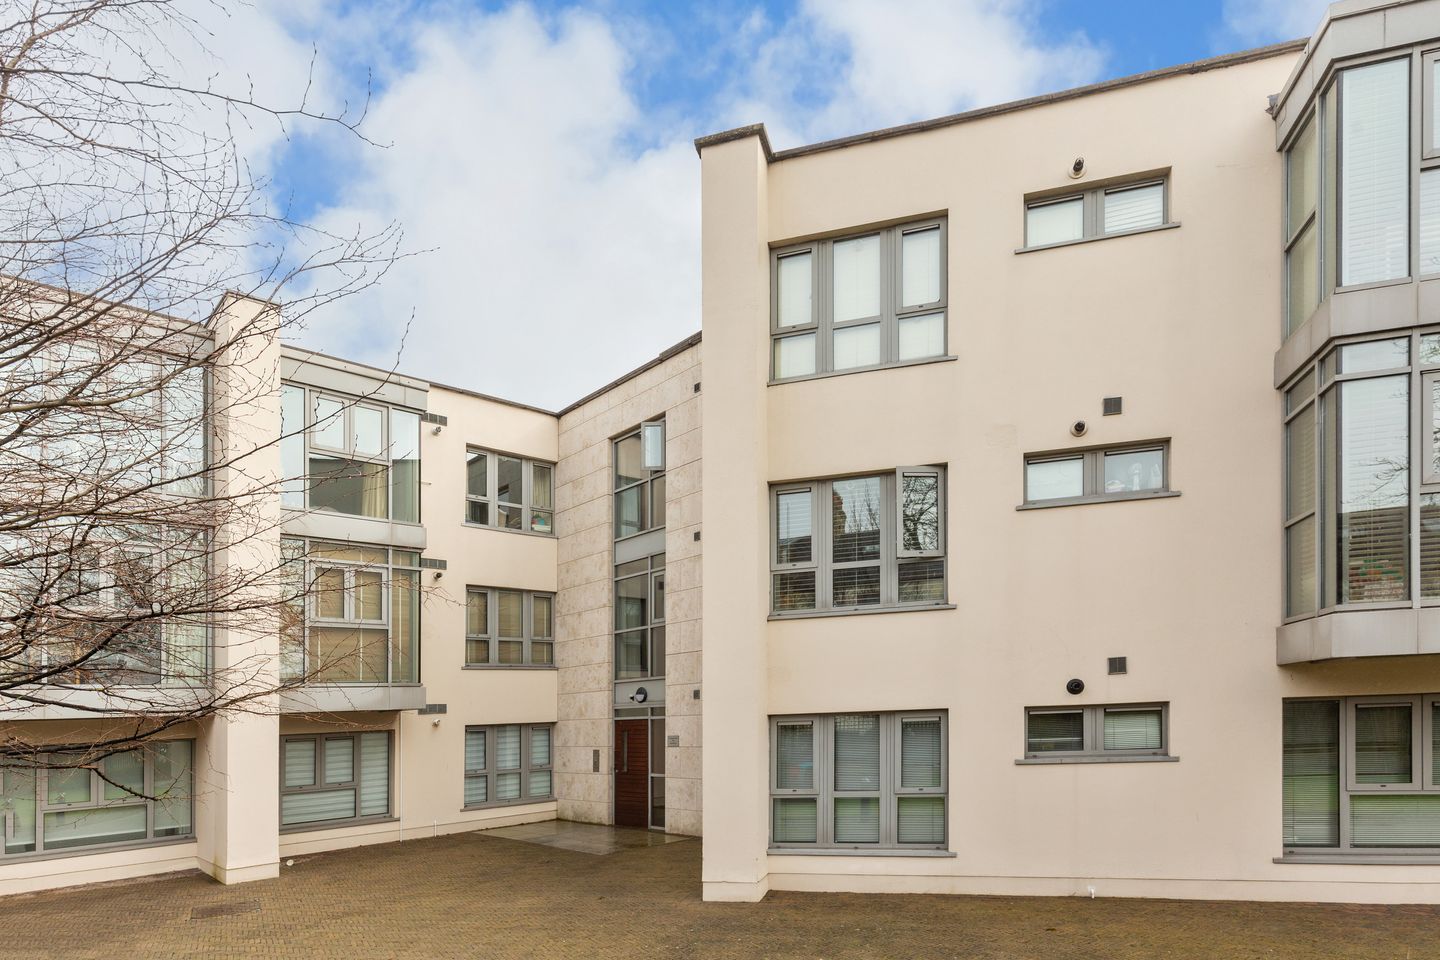 Apartment 17, Booterstown Hall, Booterstown, Co. Dublin, A94XP86